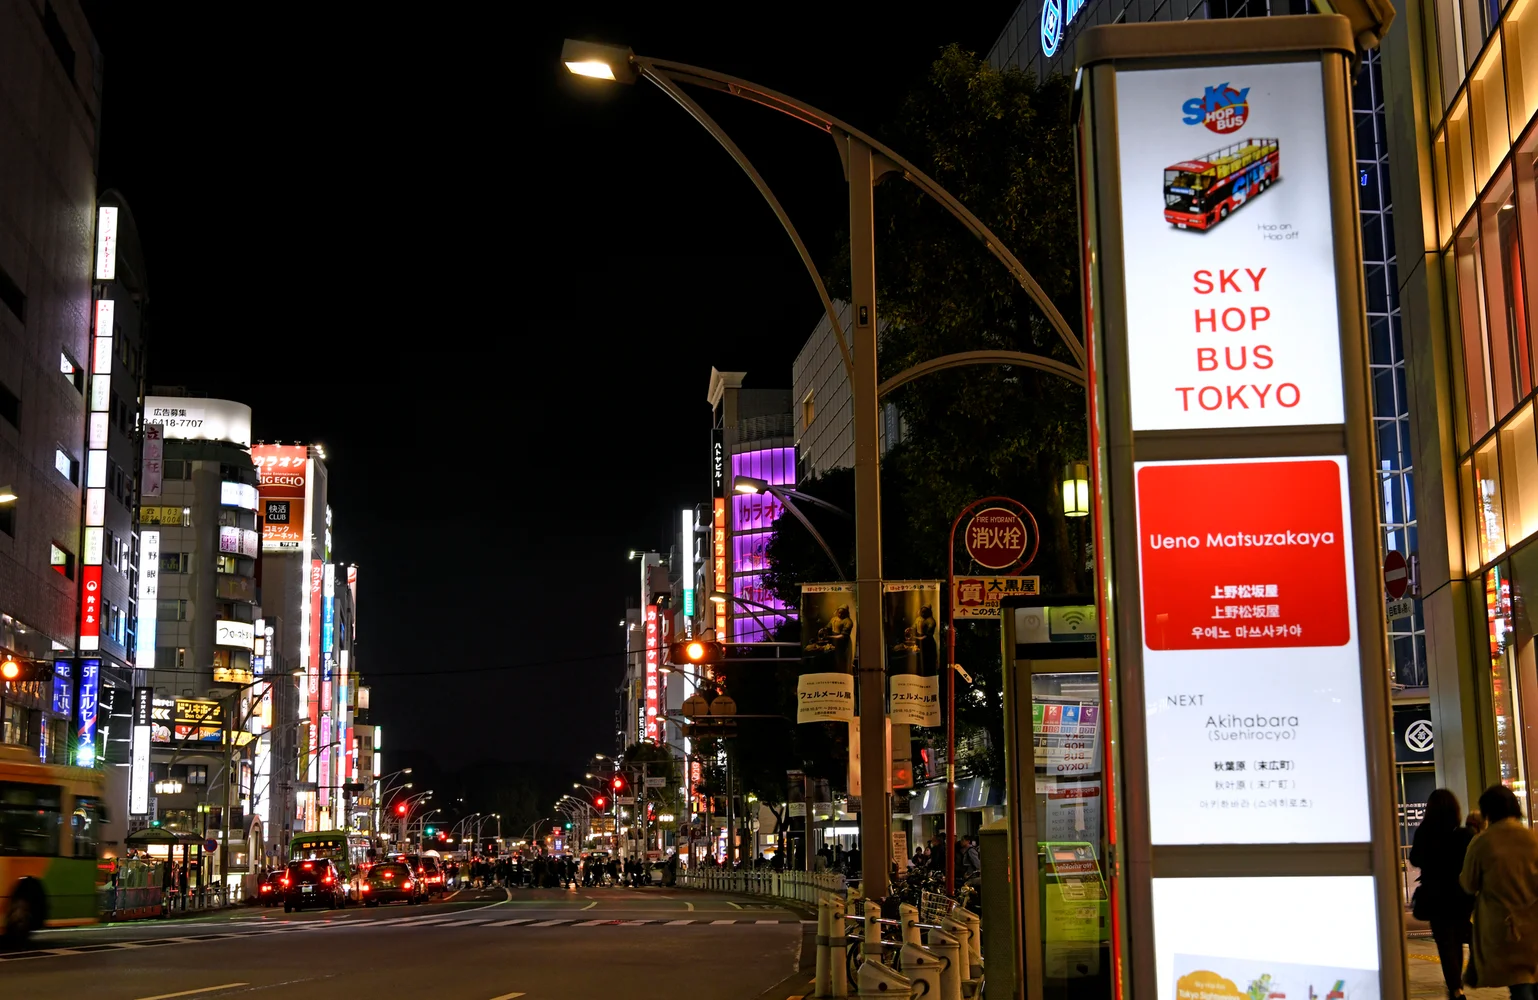 Tokyo Sky Hop Bus Tickets — Valid for 6, 8, or 10 Hours